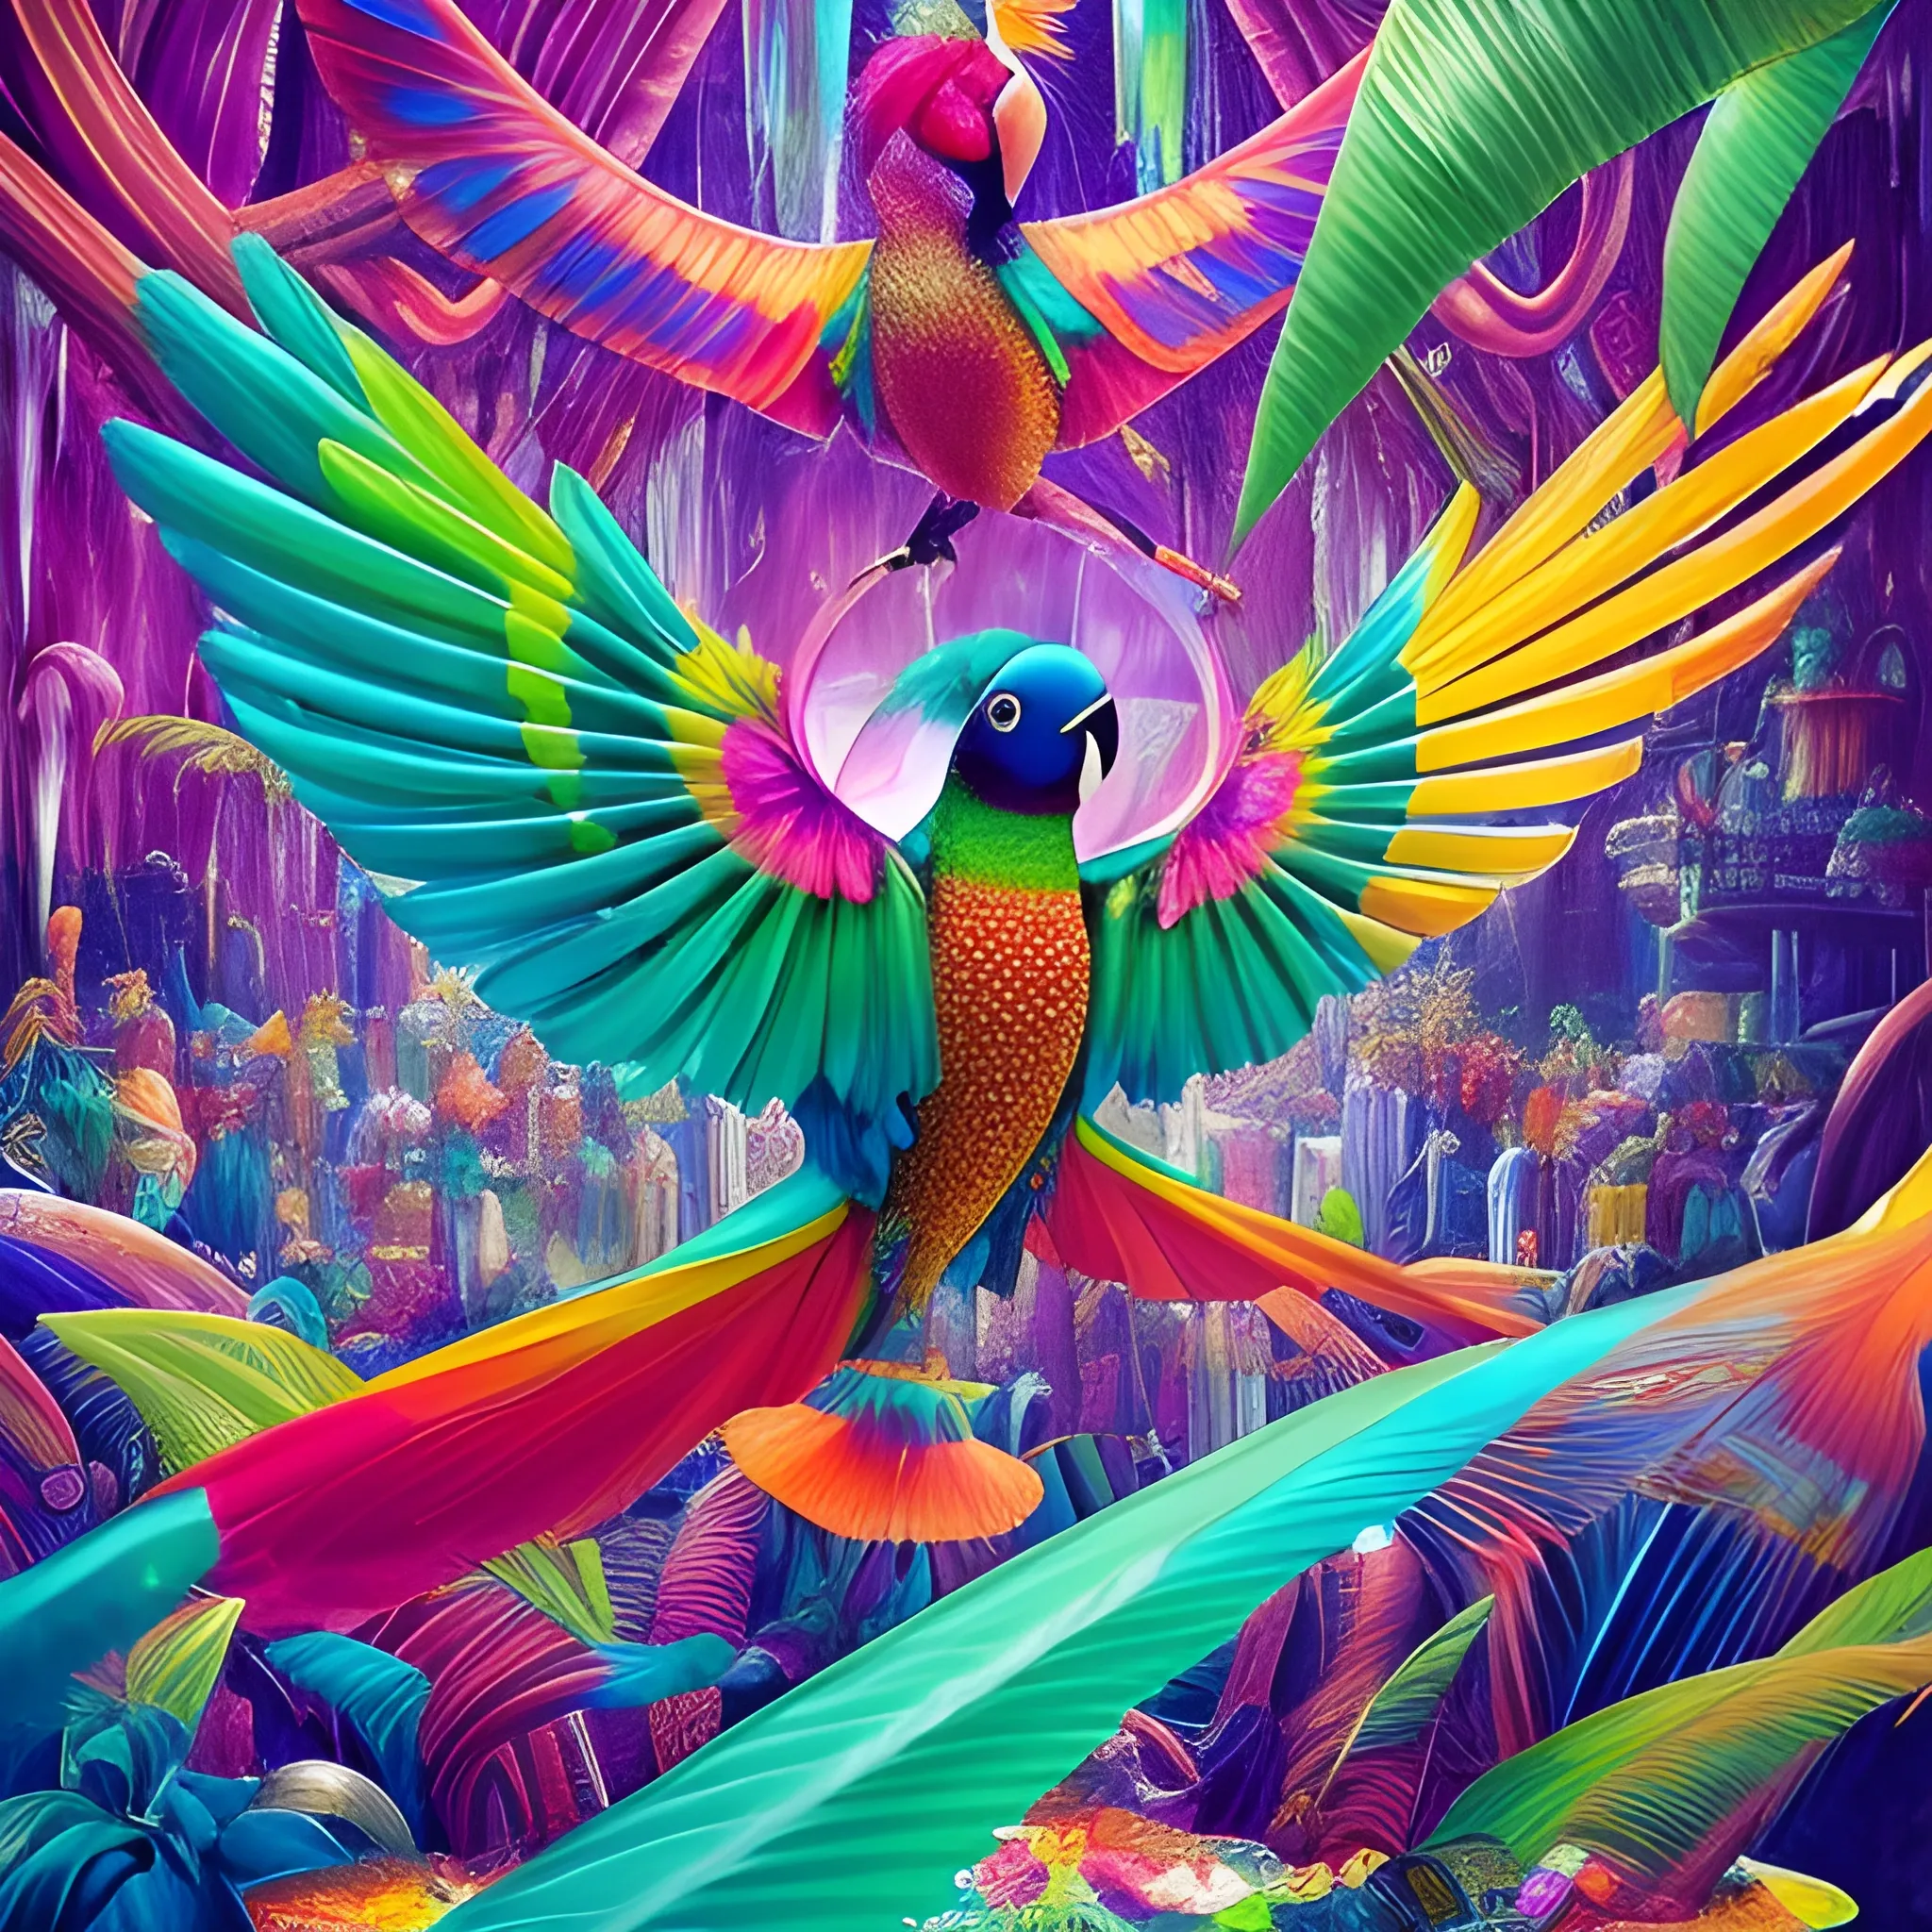 many crystal crazy birds of paradise with human face, crystal parrots around, many ice cubes  in the air, many plans of Amazon Rainforest, saturated colors, surrealism, chaotic background, 3D, Trippy,  eerie atmosphere, close up, Oil Painting, high level of detail, wide dynamic range, macro photography,  wide-angle view  